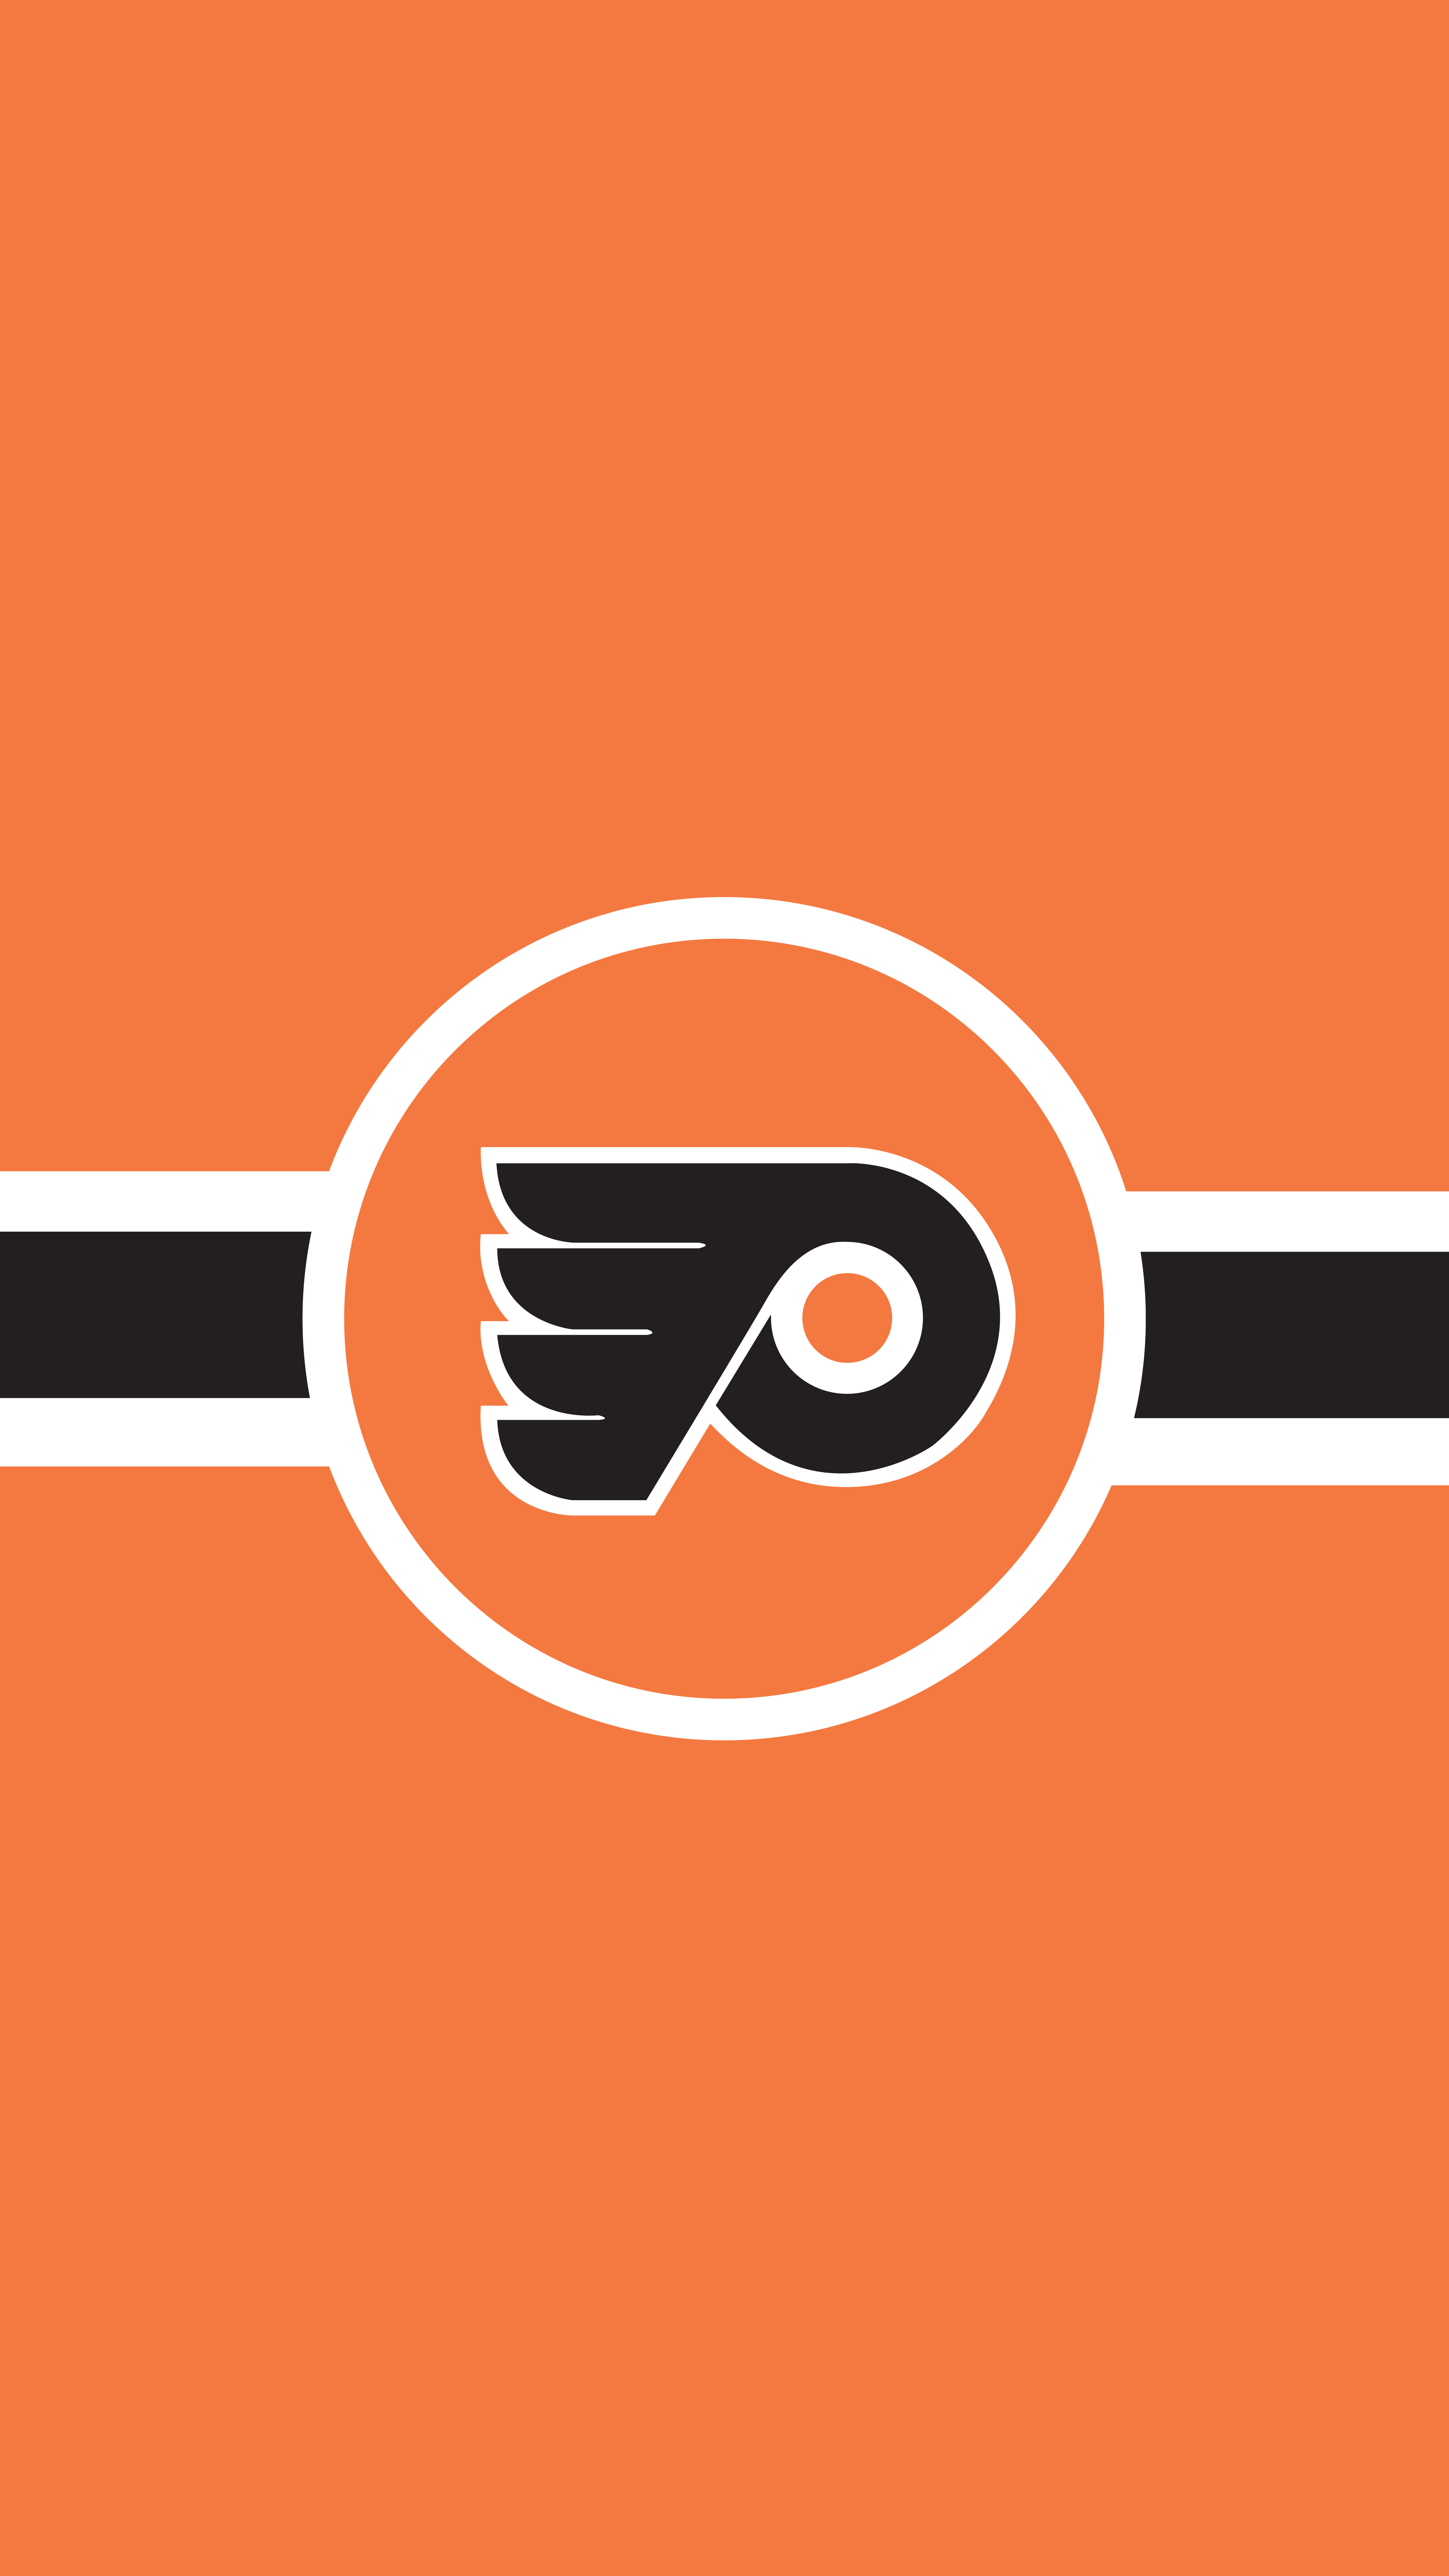 Anyone have an iPhone wallpaper? : Flyers